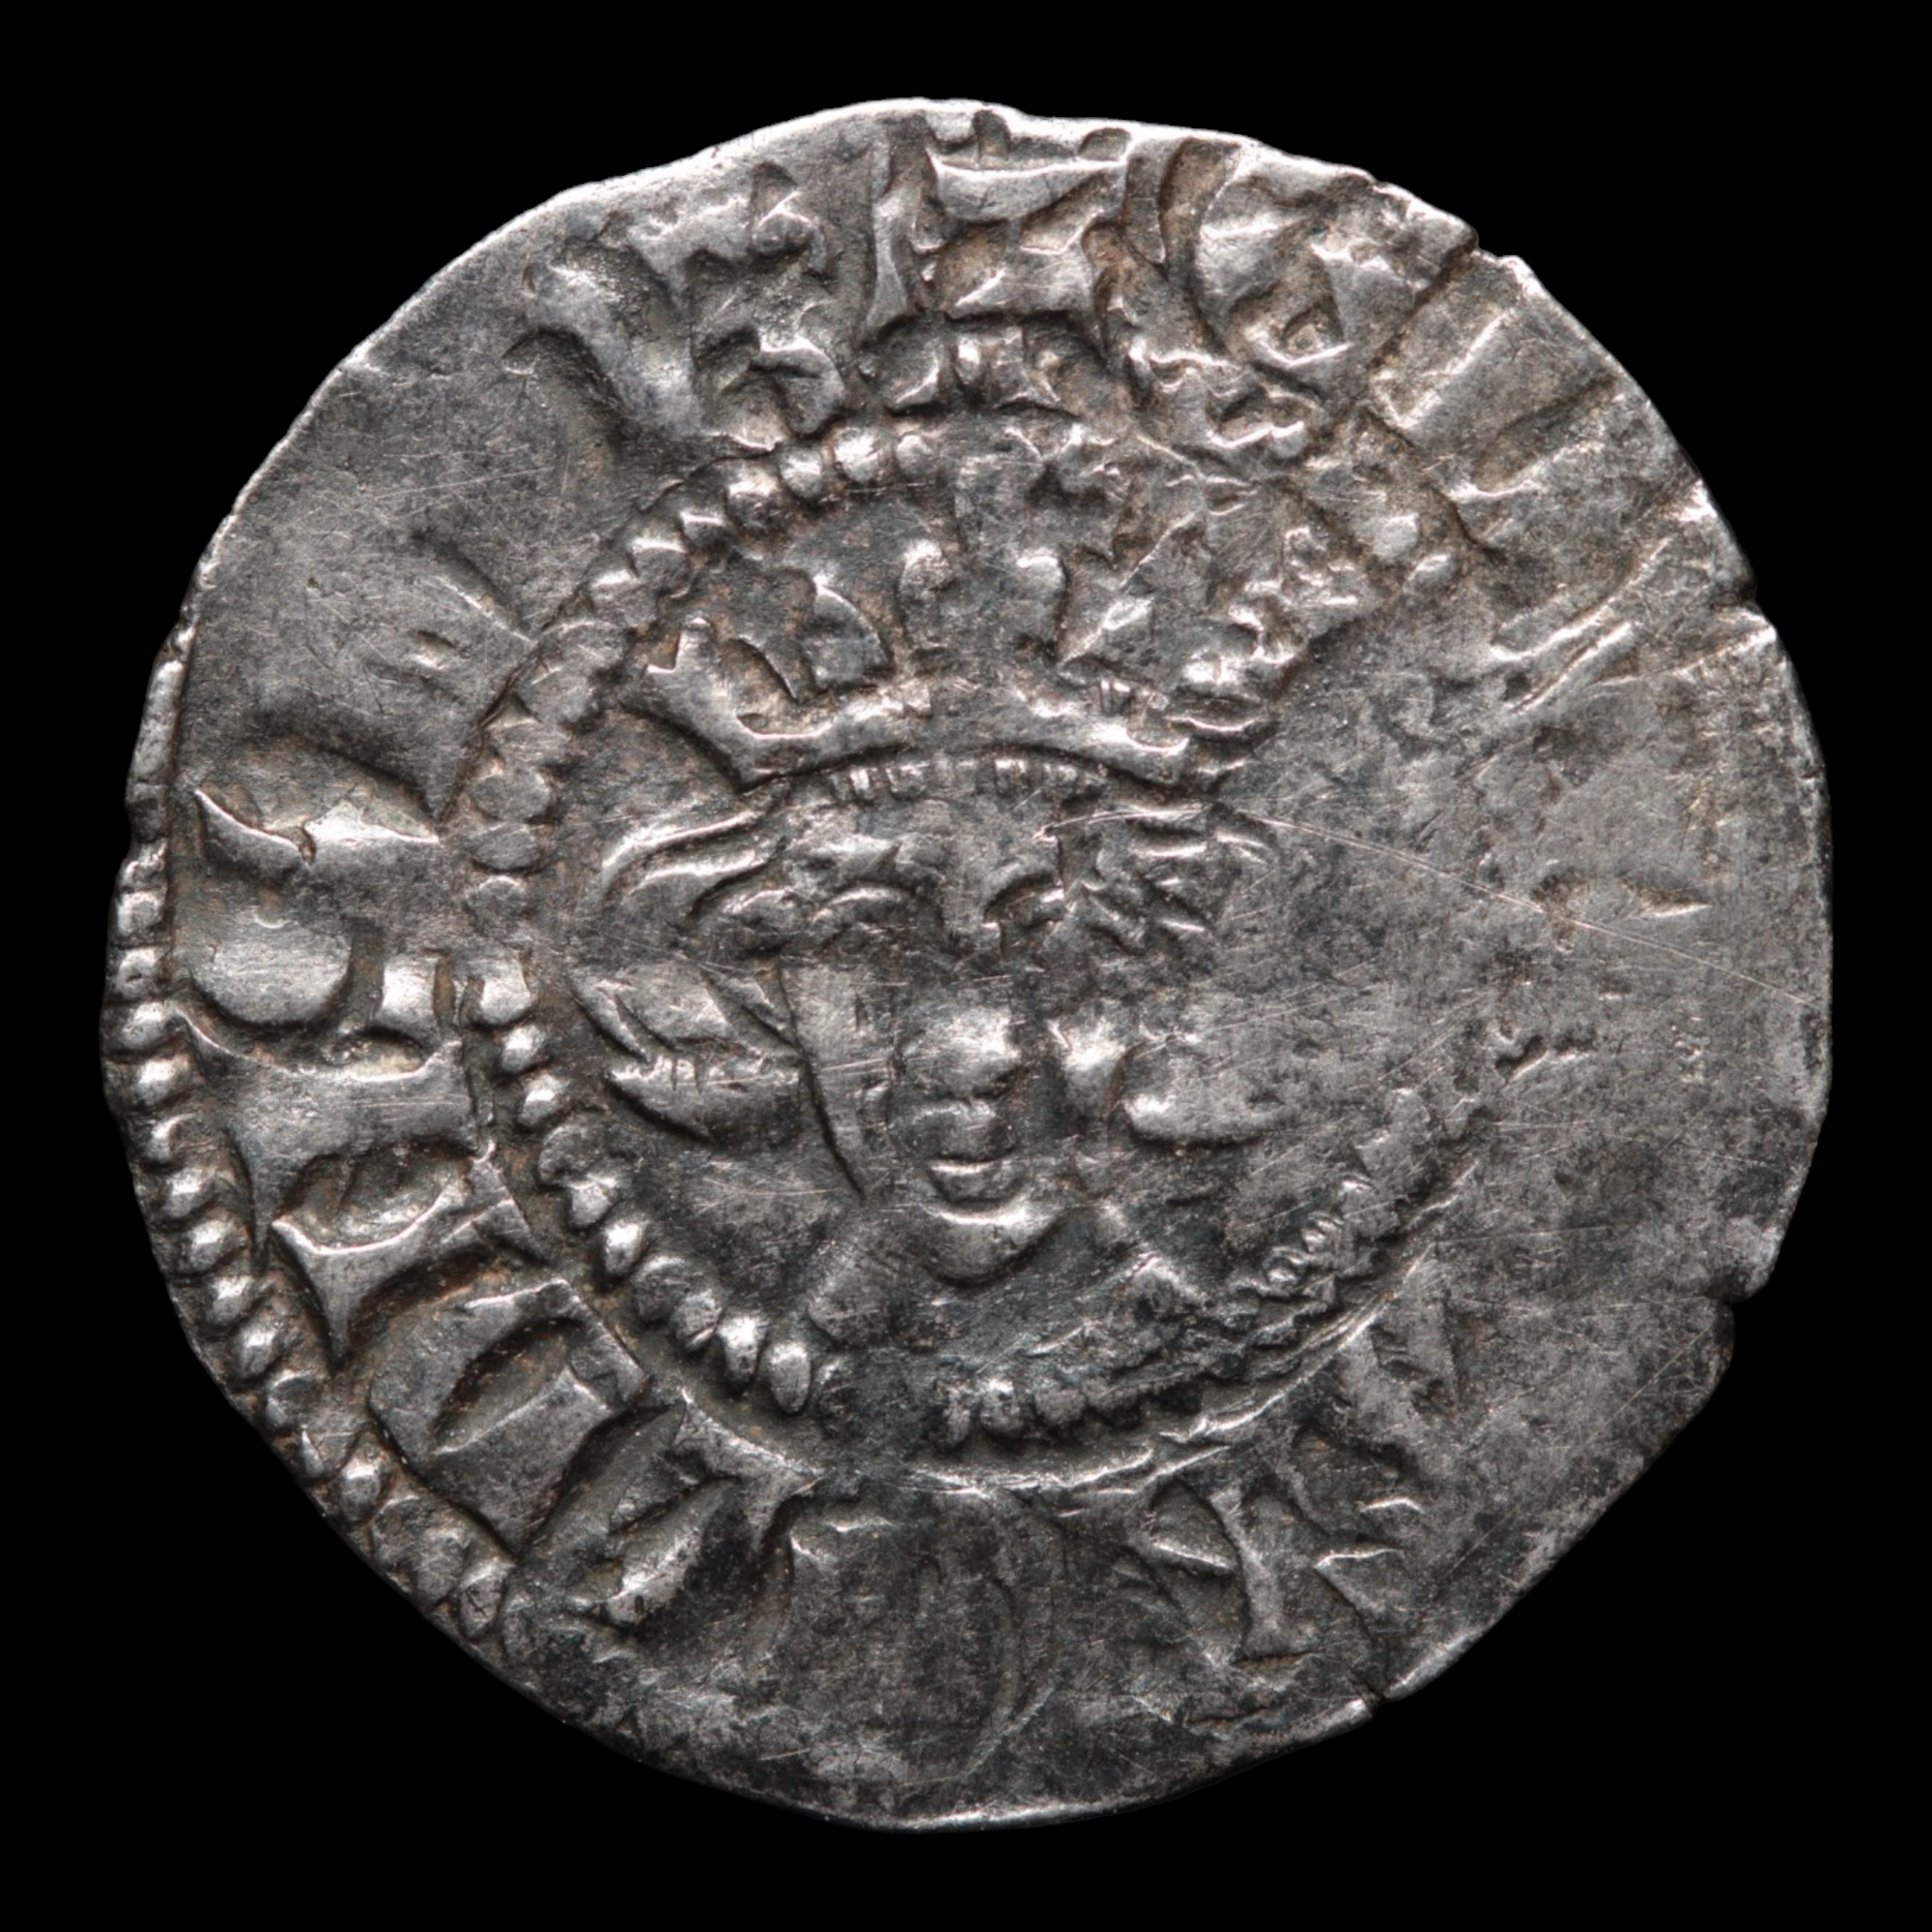 England, King Edward I, Silver Penny - 1272 to 1307 CE - Discovered in S. Norfolk - 10/19/23 Auction